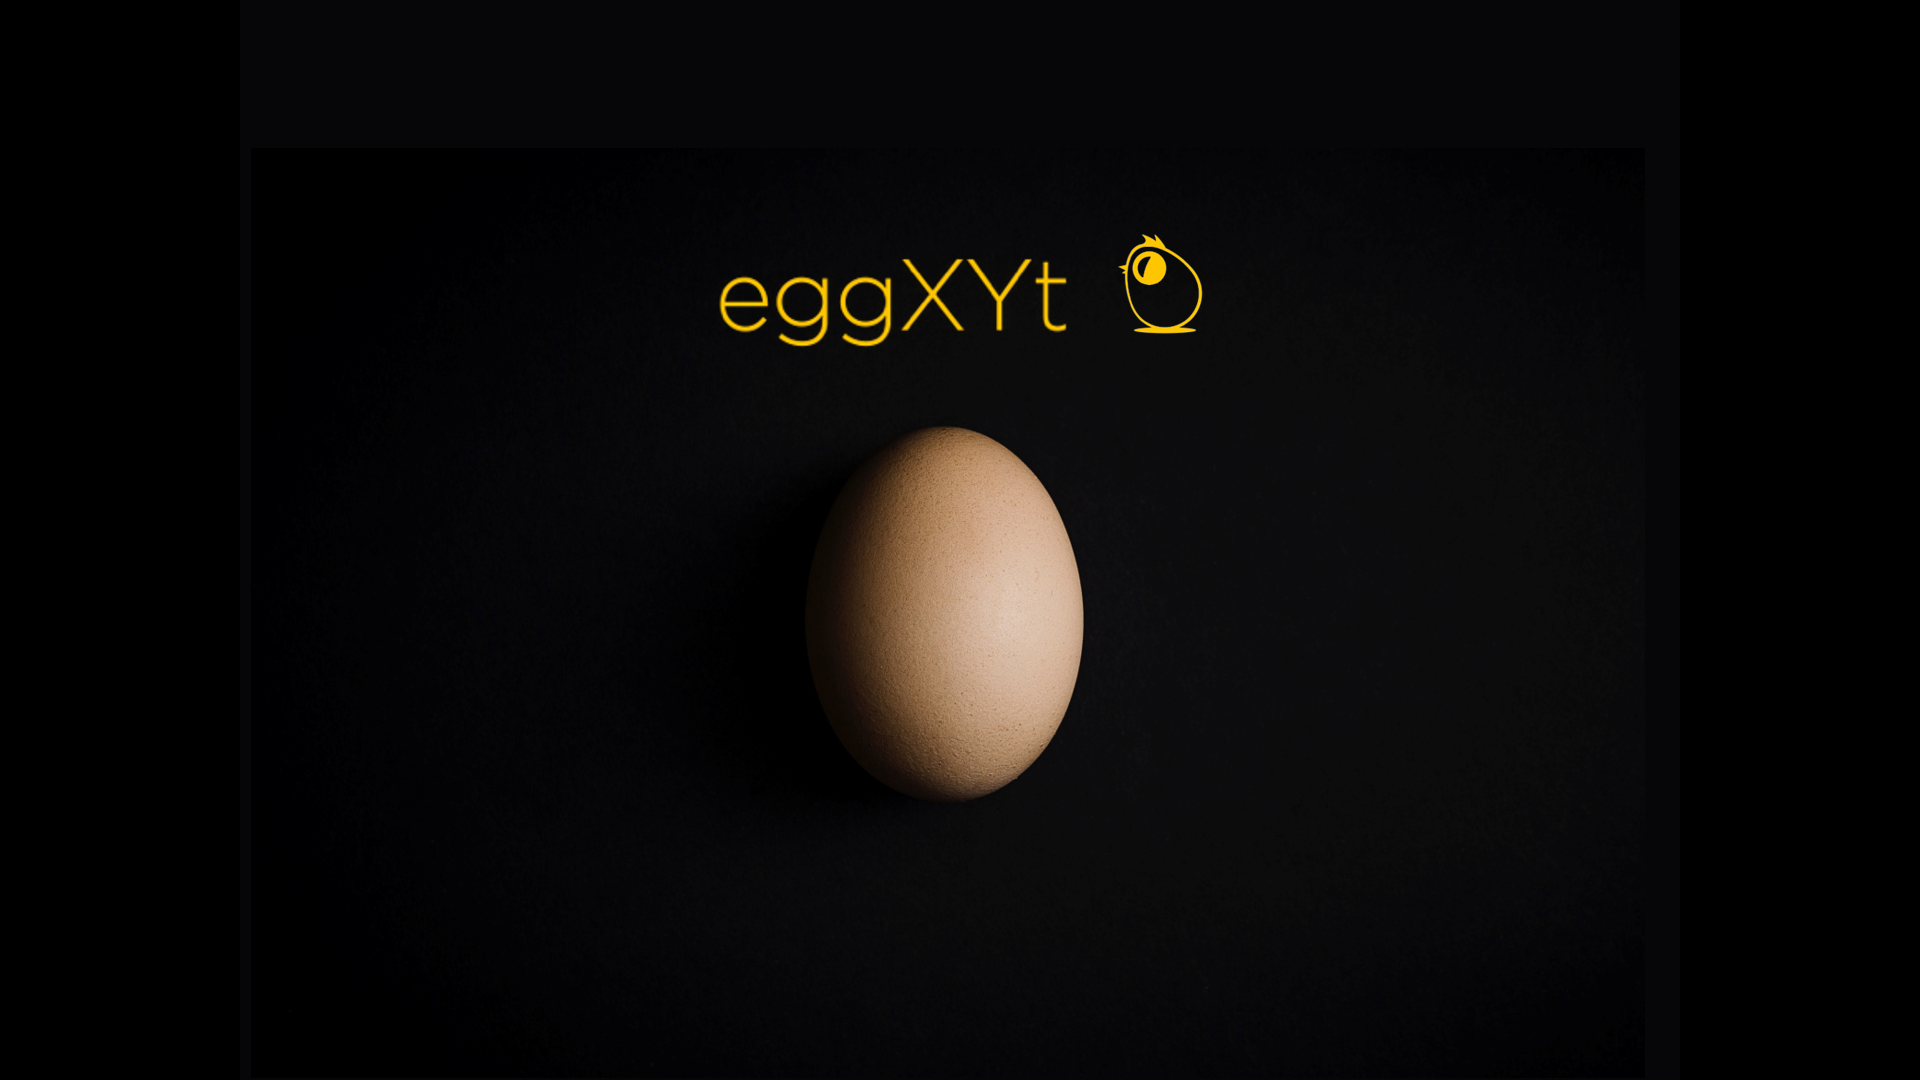 EggXYt is bringing gene-editing to poultry farms to save chicks and resources